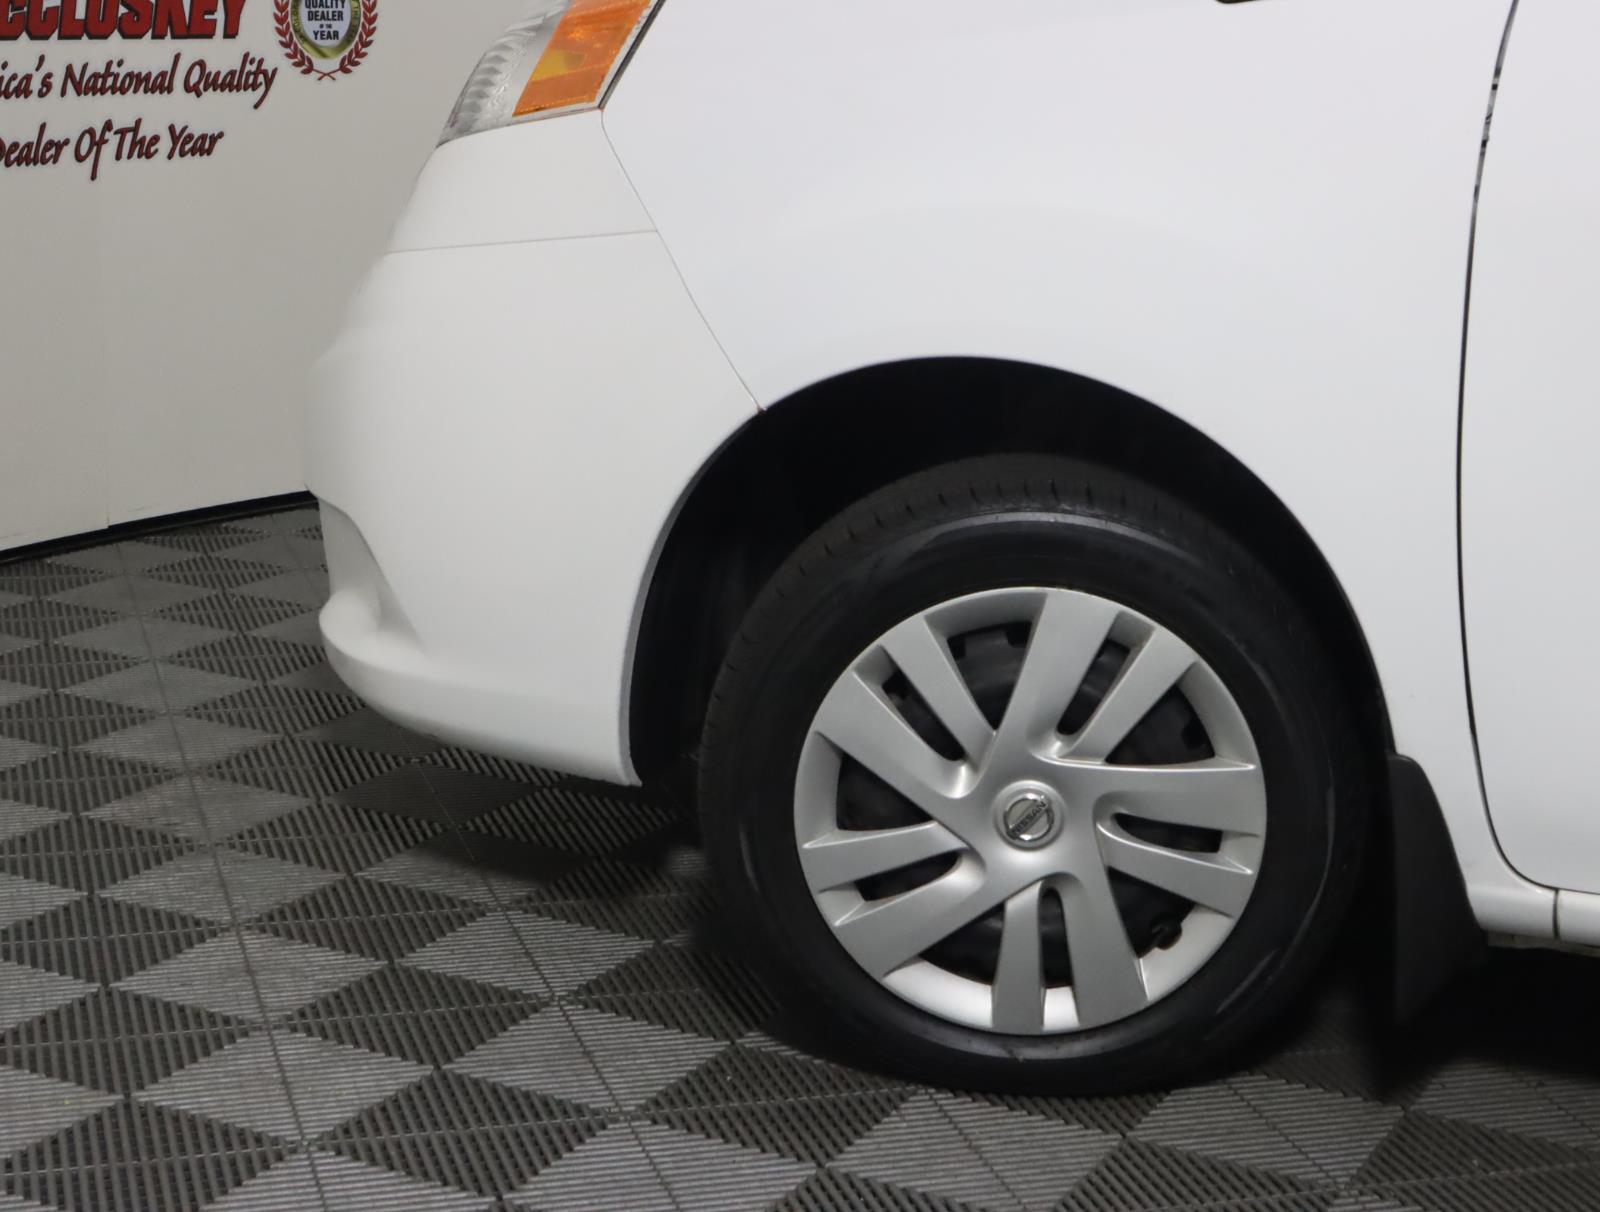 Preowned 2019 NISSAN NV200 NEW BRAKES AND TIRES! for sale by McCloskey Imports & 4X4's in Colorado Springs, CO